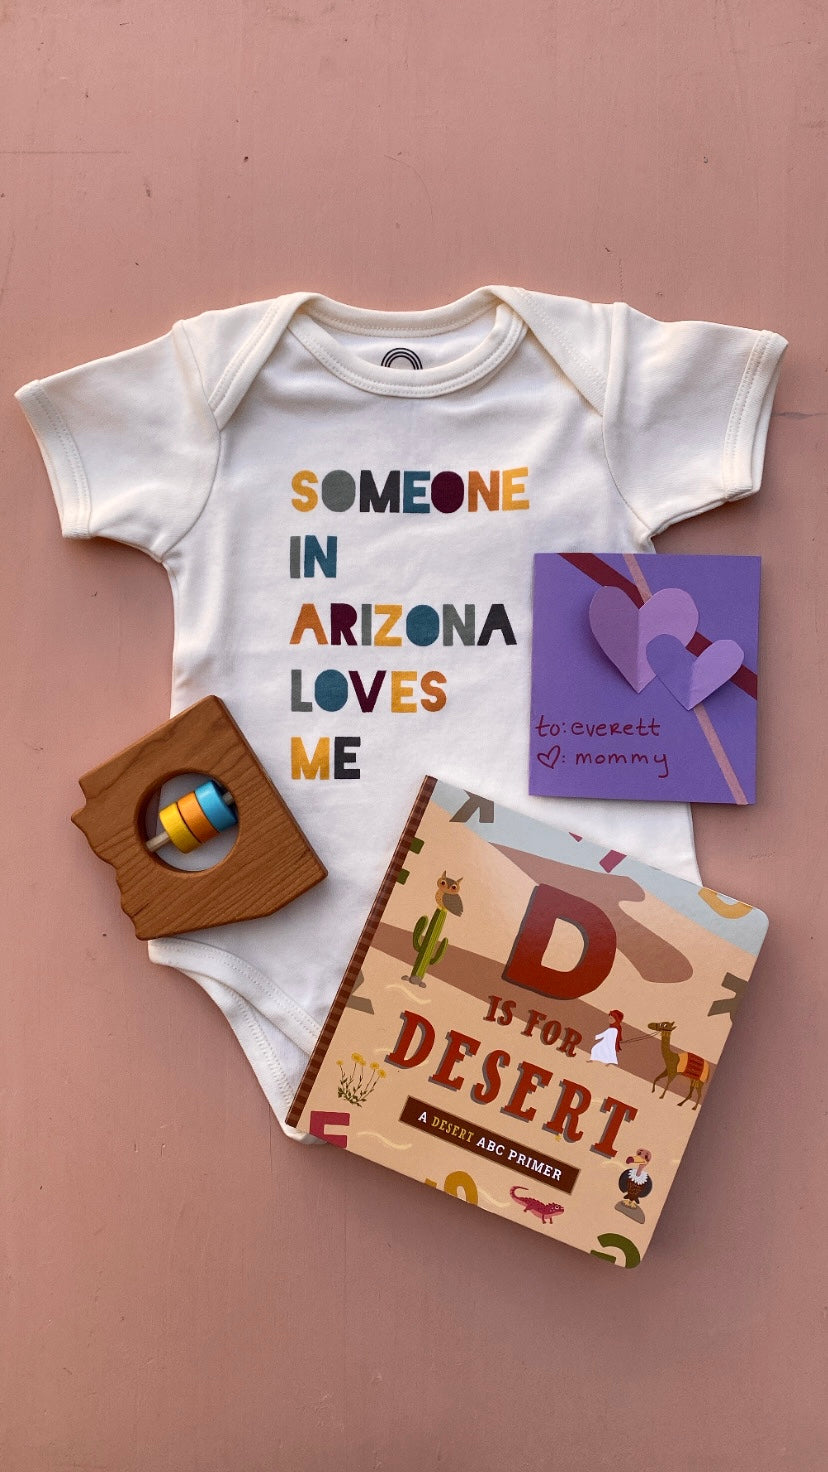 Someone in arizona loves me onesie with arizona themed gifts